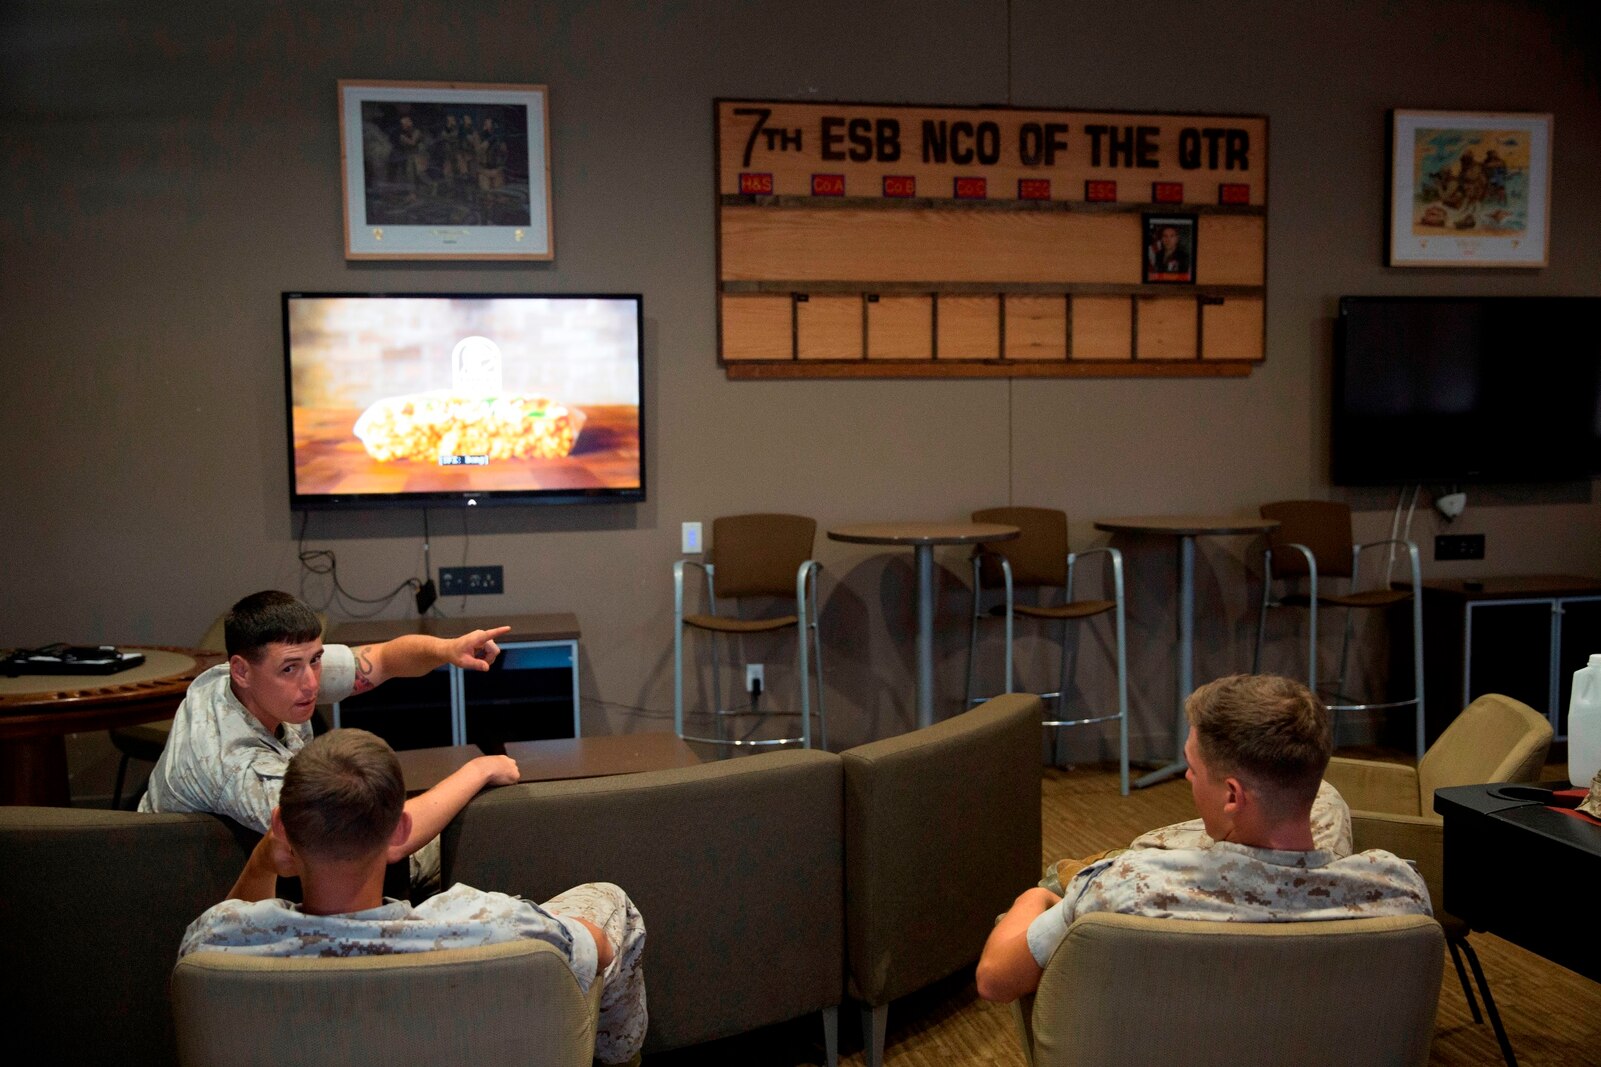 U.S. Marines from 7th Engineer Support Battalion, 1st Marine Logistics Group, unwind in Chapultepec’s Lounge, in their barracks building aboard Camp Pendleton, Calif., July 29, 2016. The lounge was built to give non-commissioned officers a place to relax and share experiences. (U.S. Marines Corps photo by Lance Cpl. Kyle McNan/released)